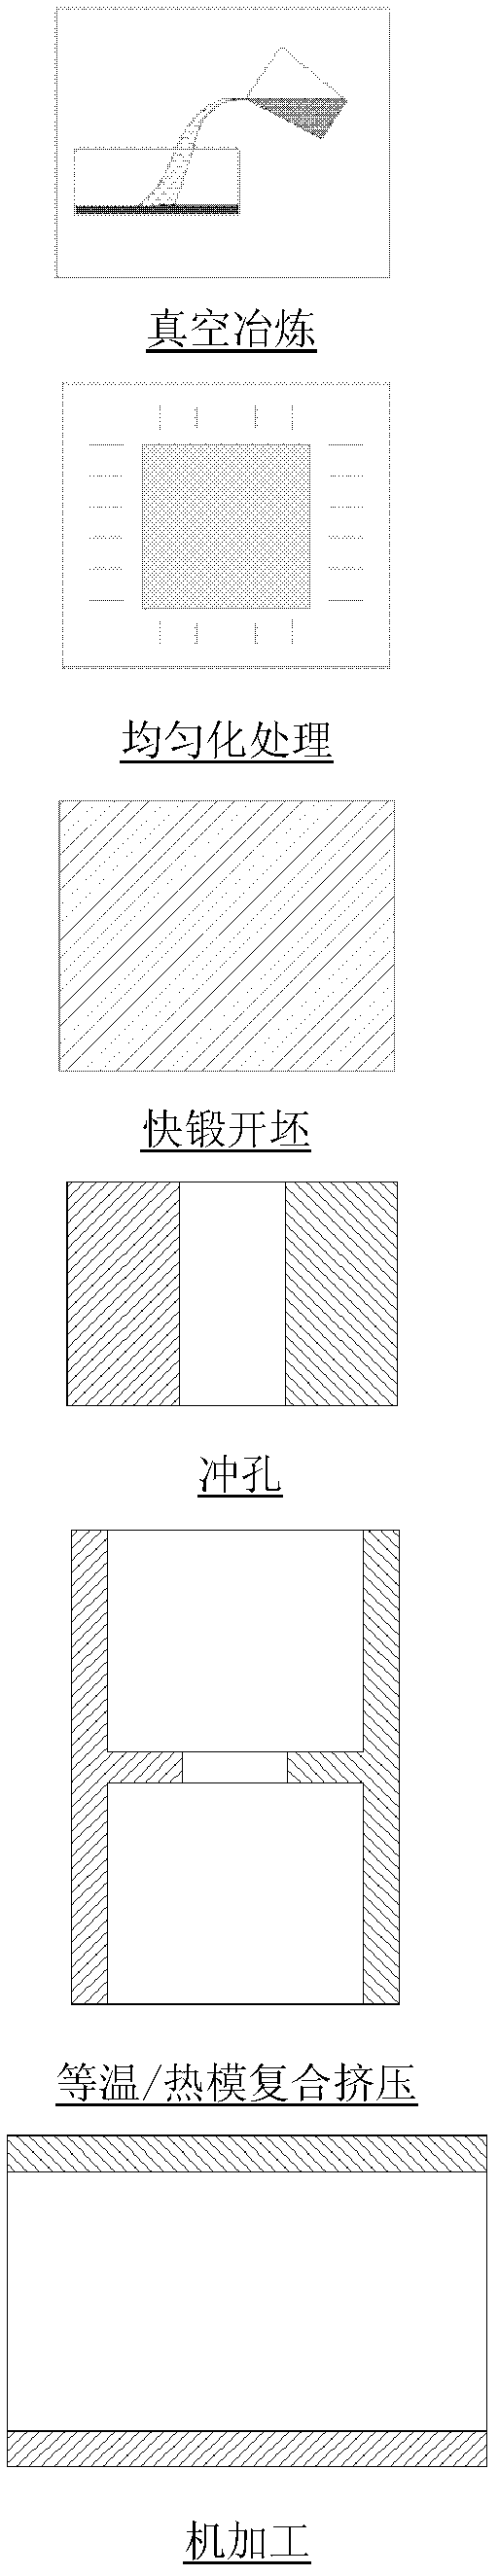 Compound extrusion preparation method of large-diameter high-quality tube blank or annular blank